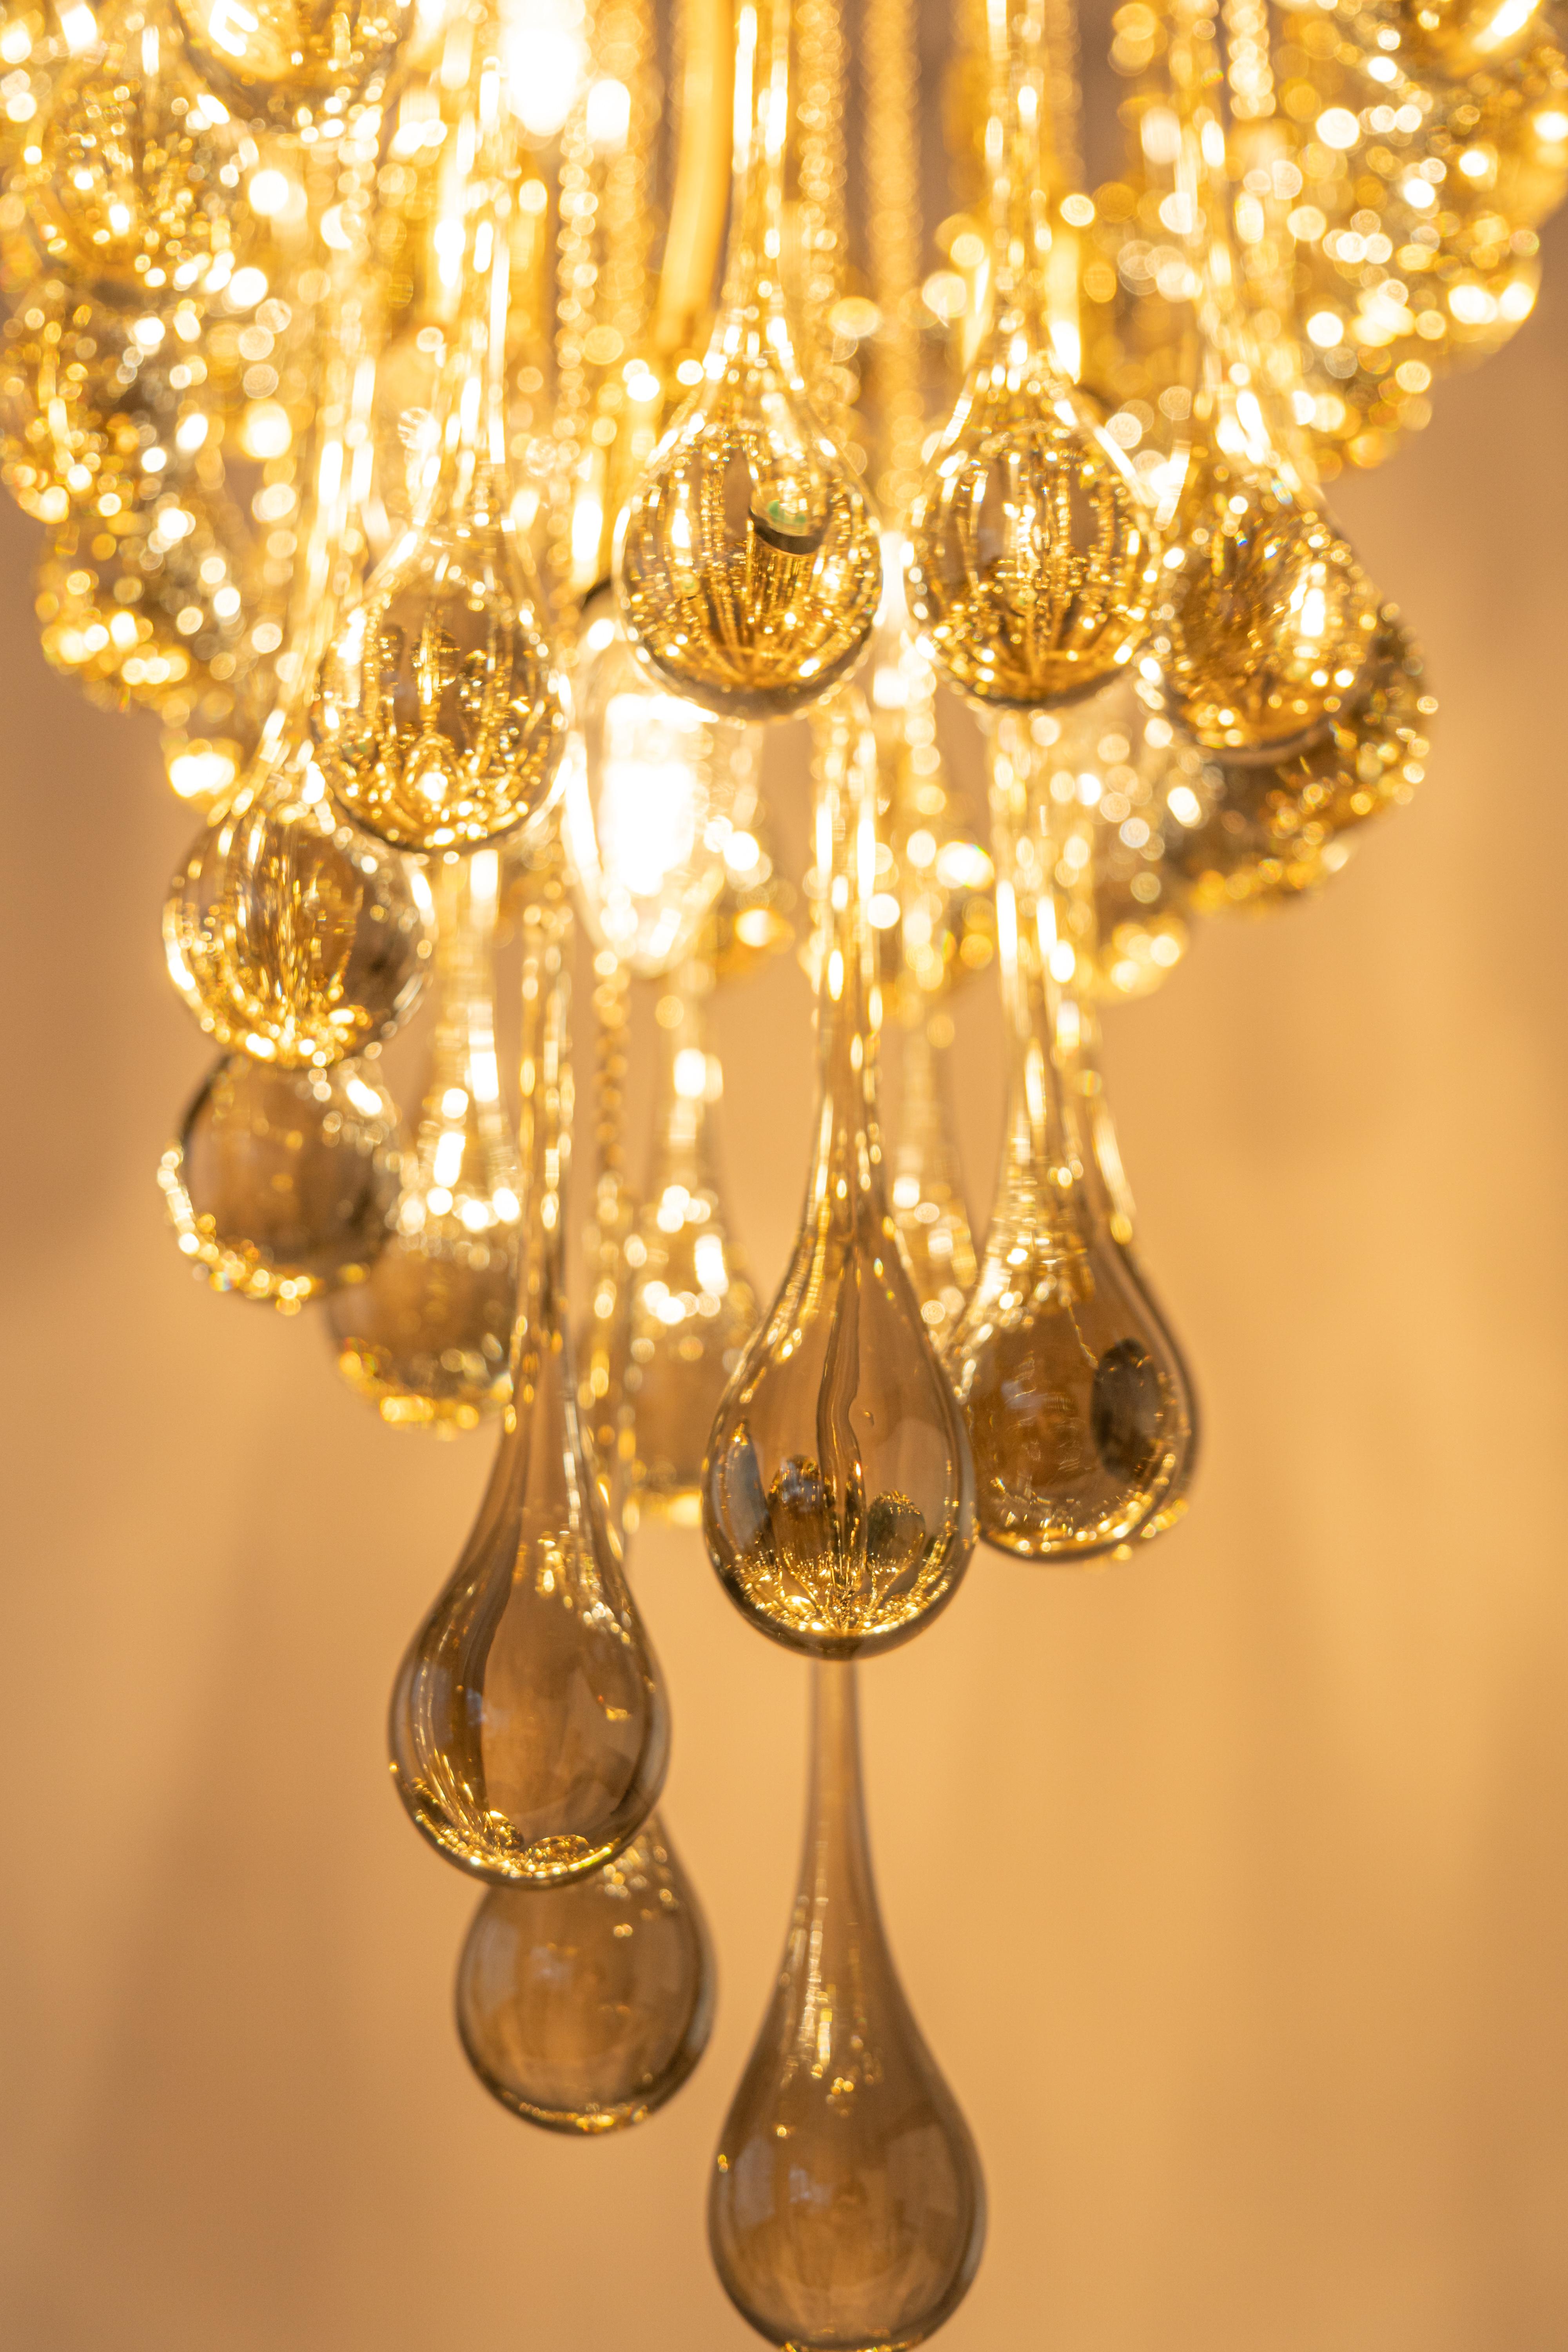 Large Murano Glass Tear Drop Chandelier, Christoph Palme, Germany, 1970s For Sale 6